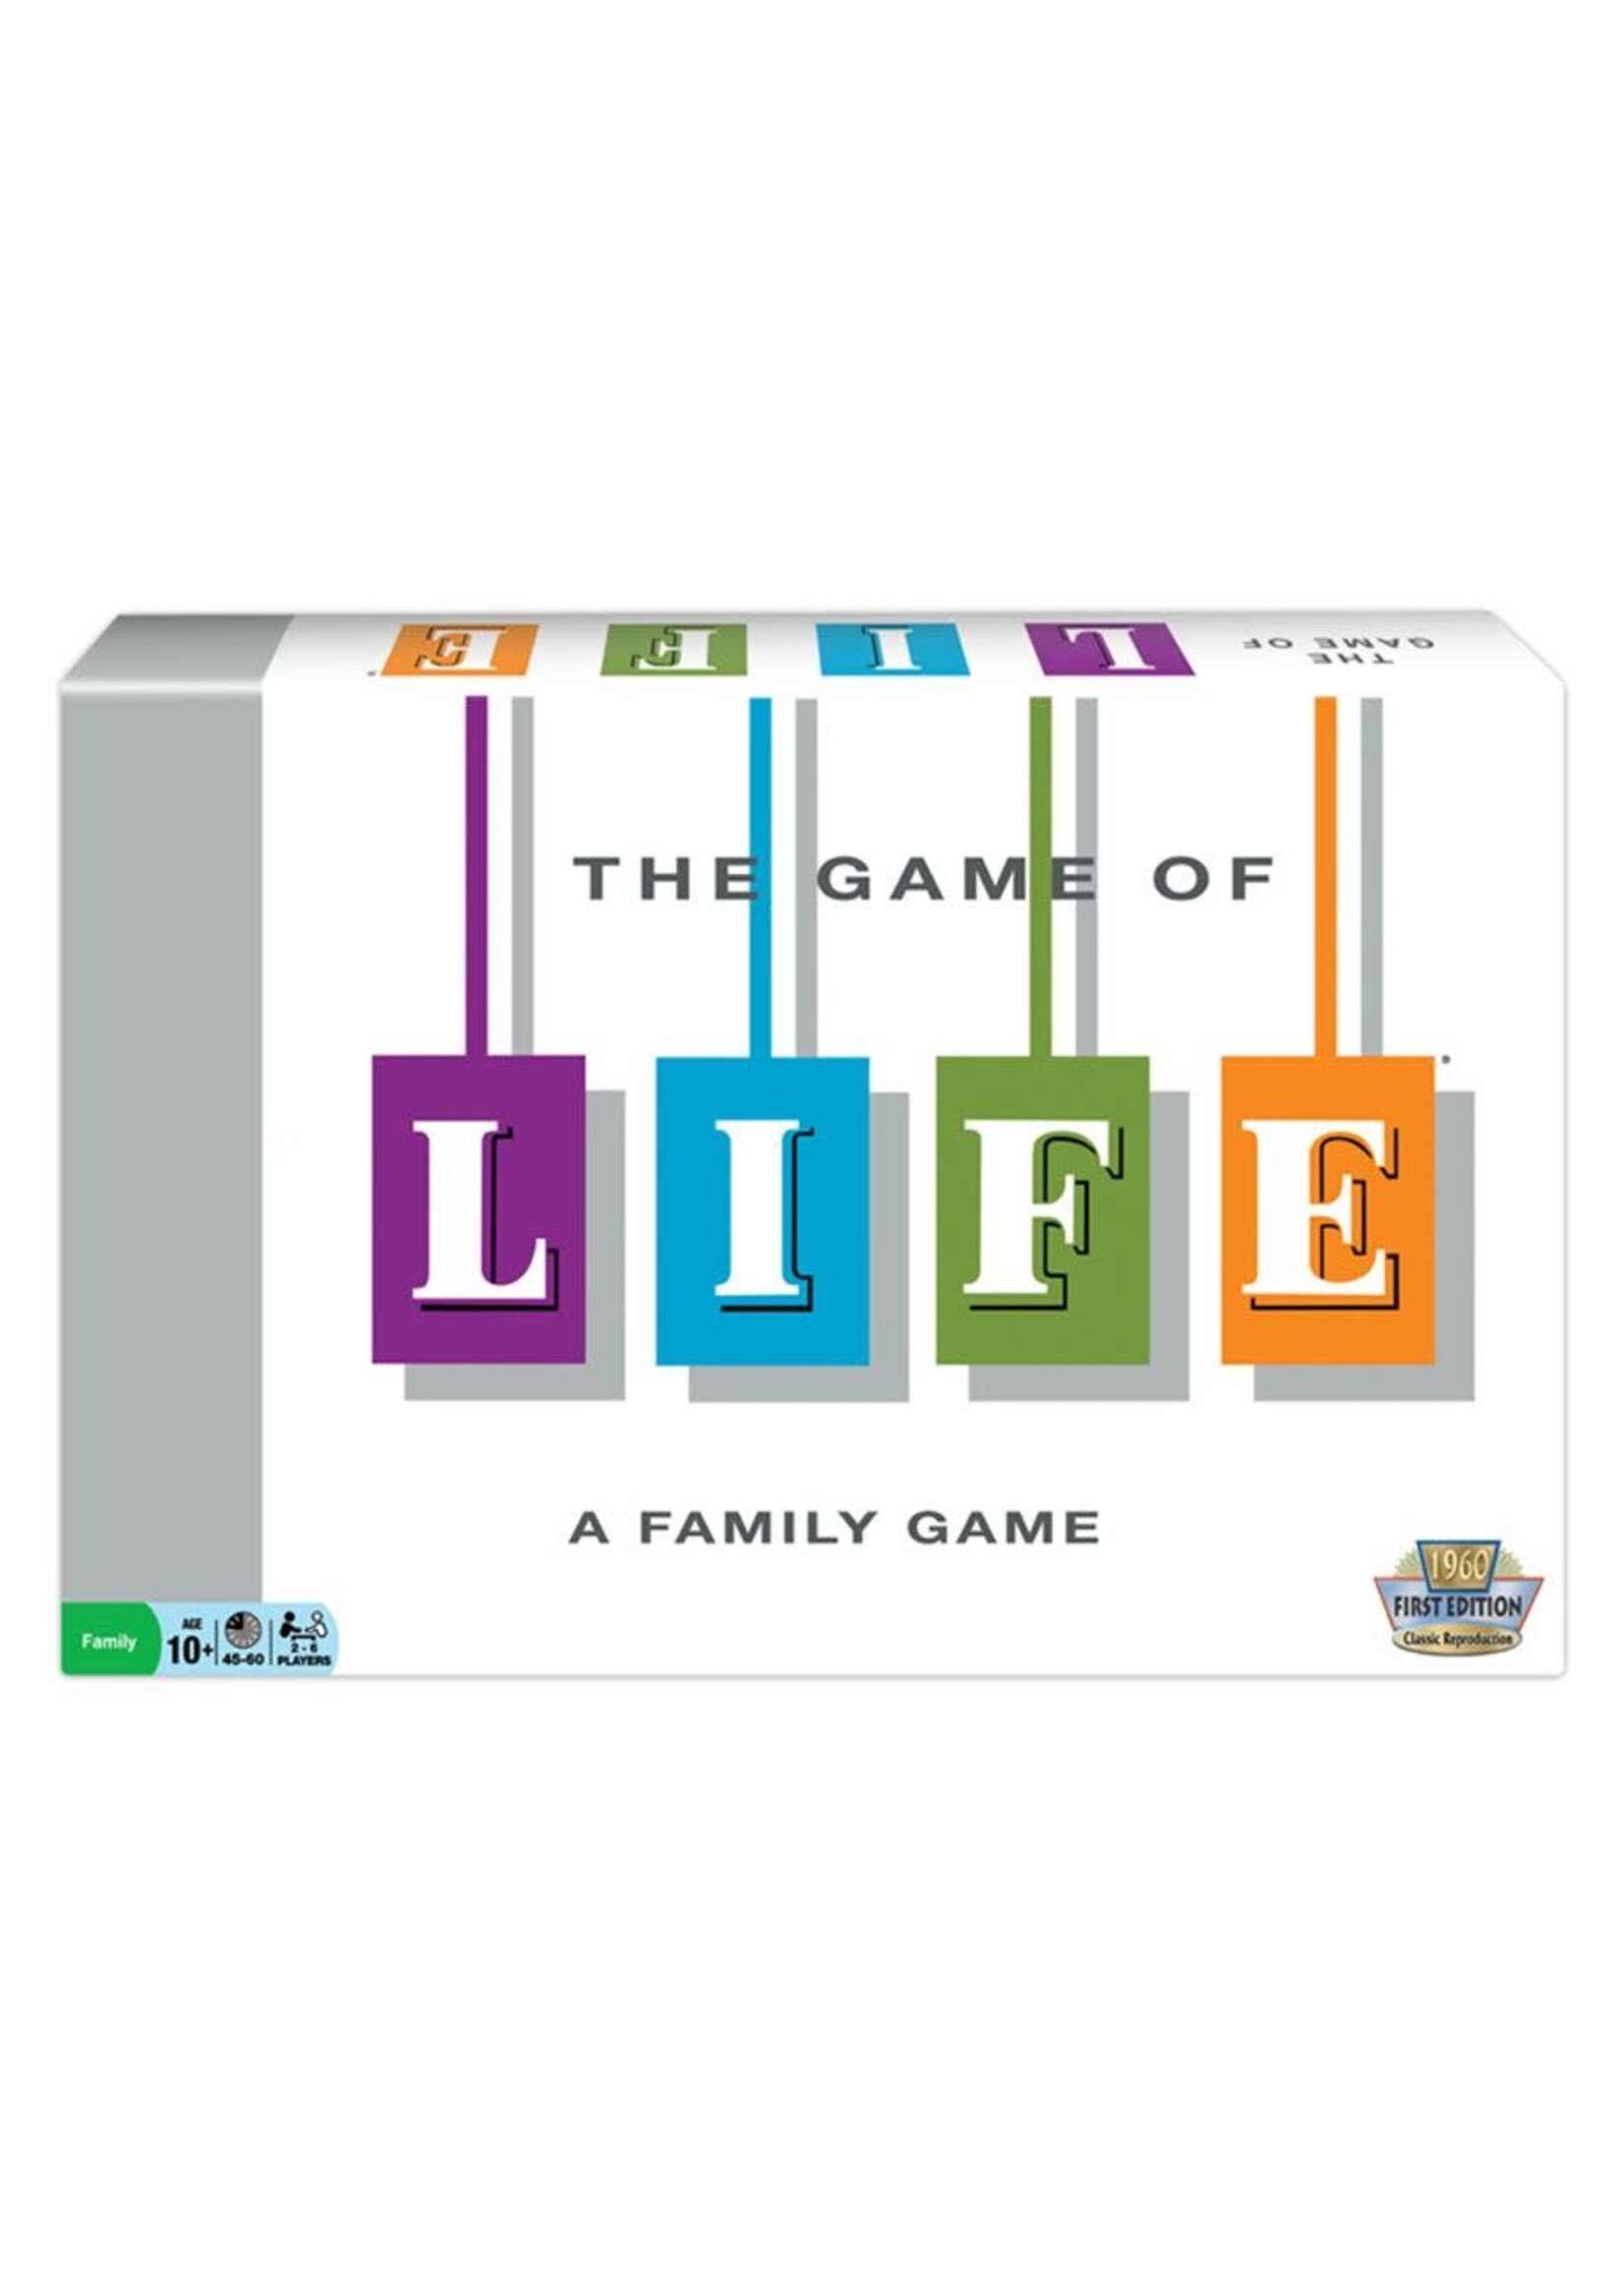 Winning Moves Games The Game of Life Classic Edition